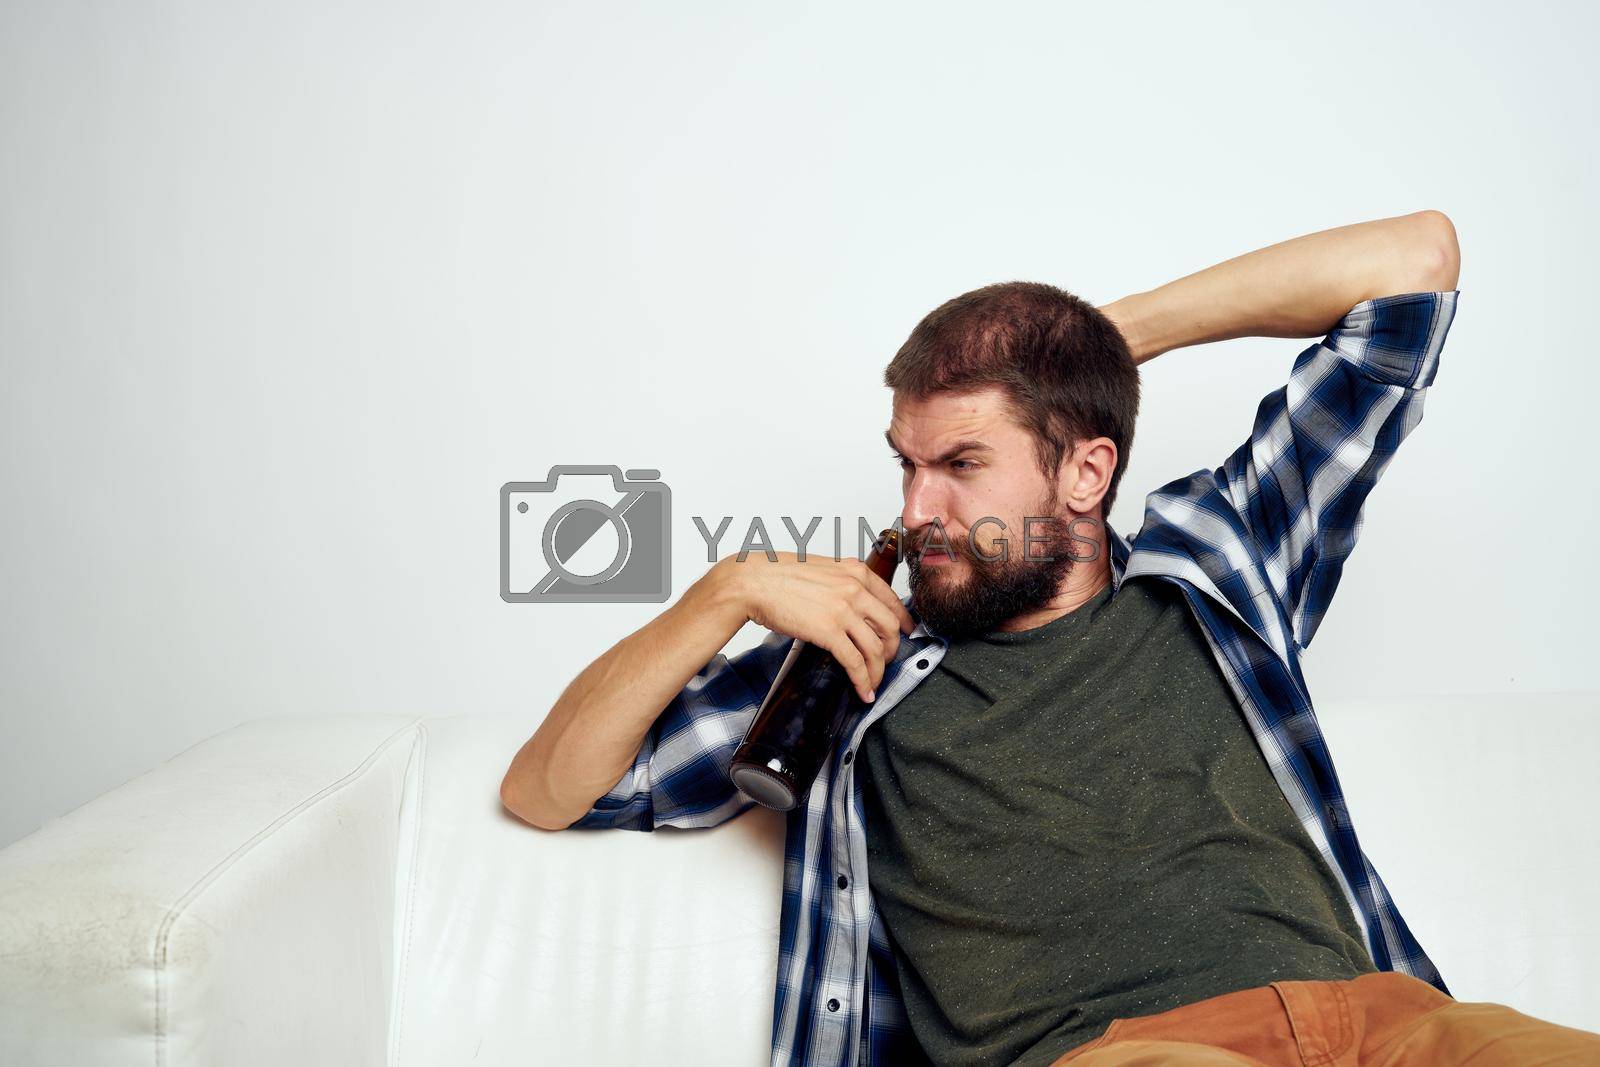 Royalty free image of drunk man alcoholism problems emotions depression light background by Vichizh